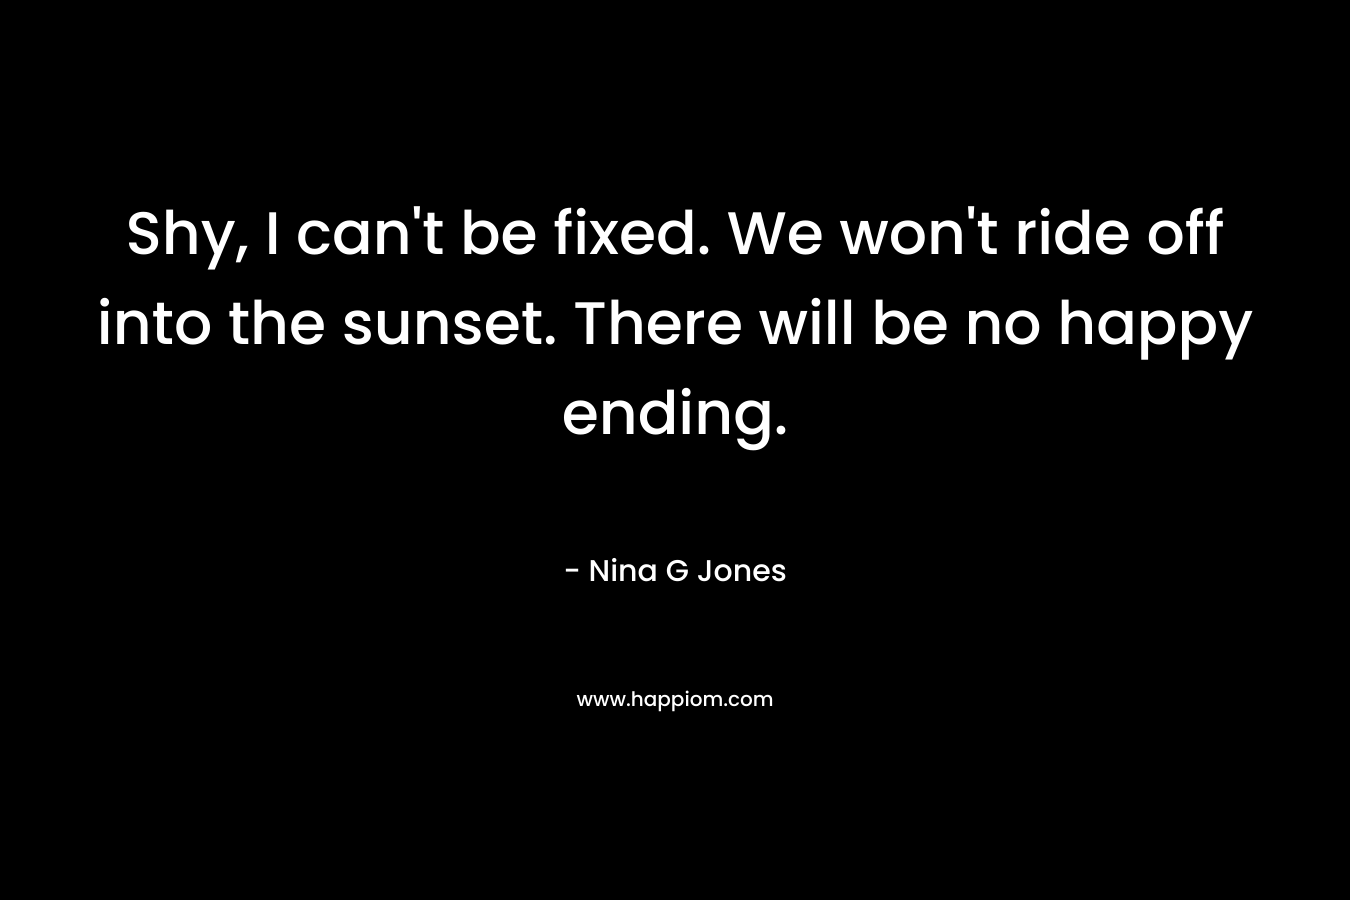 Shy, I can’t be fixed. We won’t ride off into the sunset. There will be no happy ending. – Nina G Jones